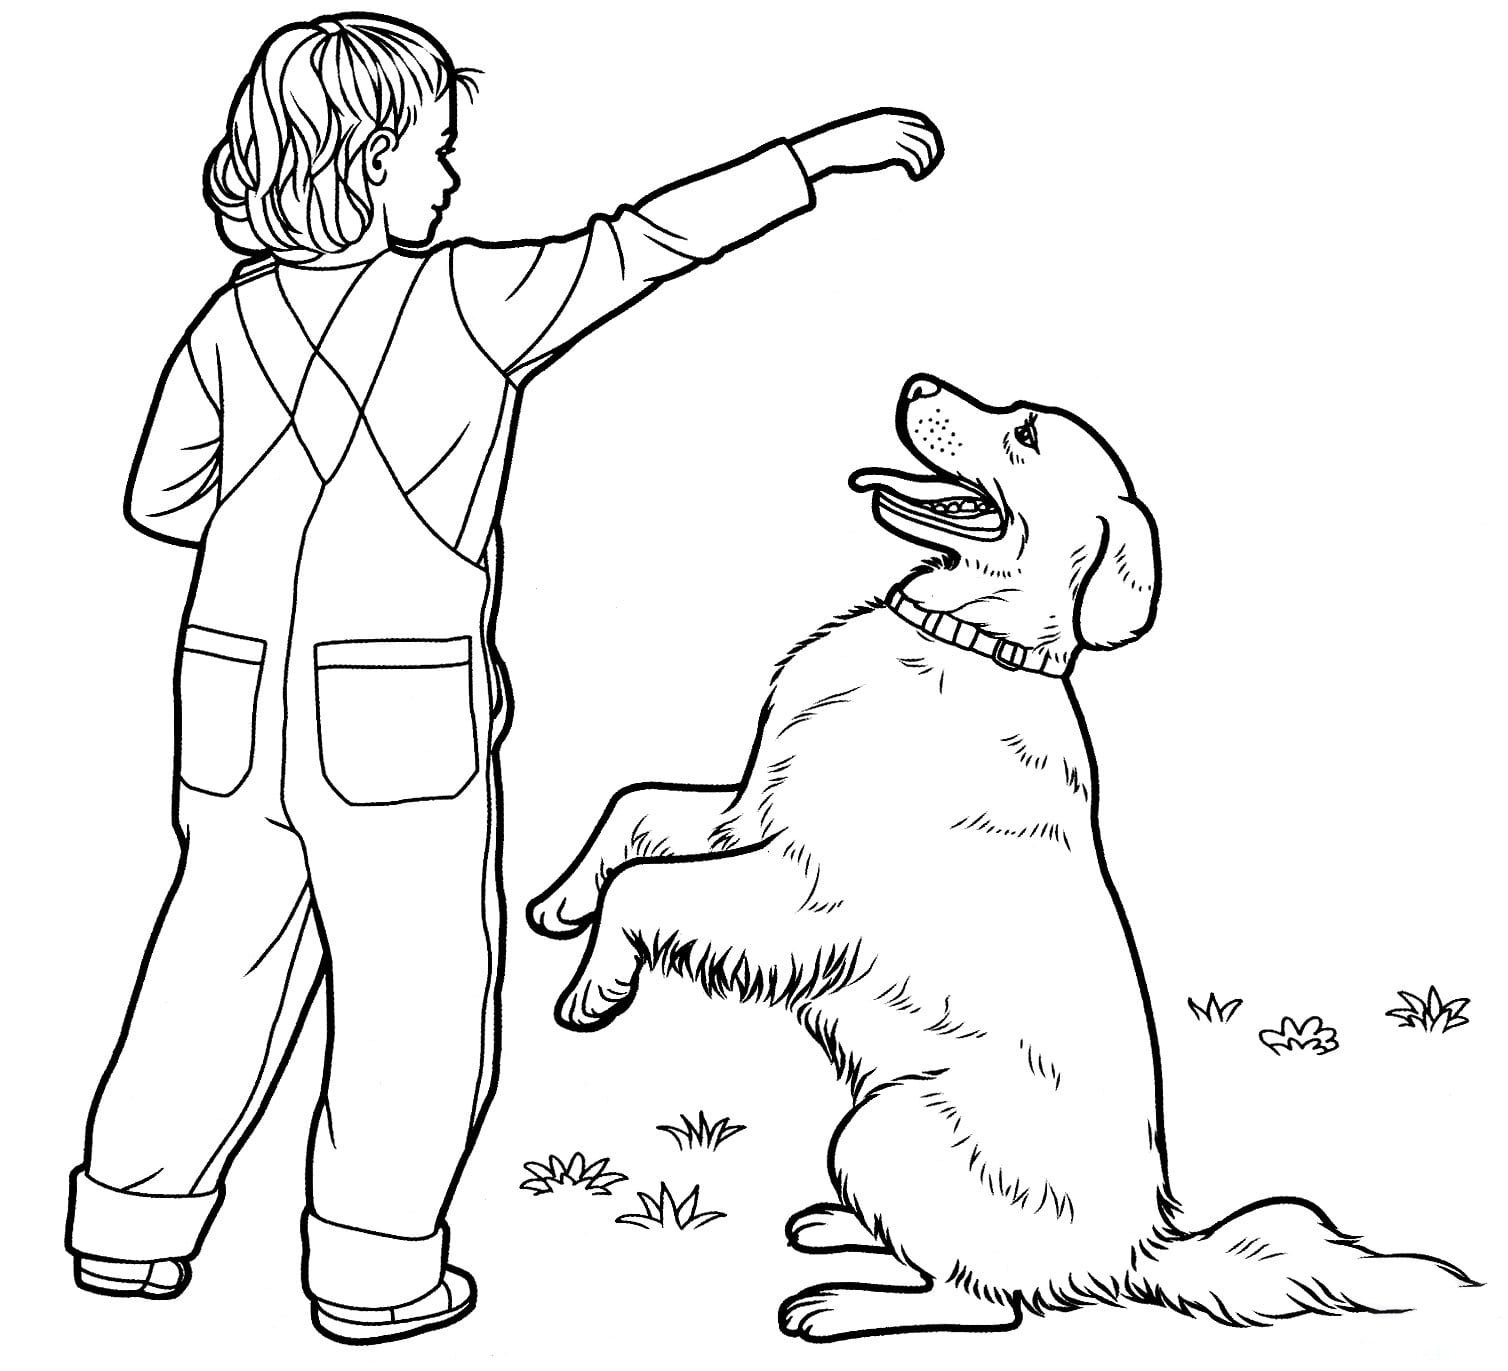 Labrador Coloring Pages   Best Coloring Pages For Kids